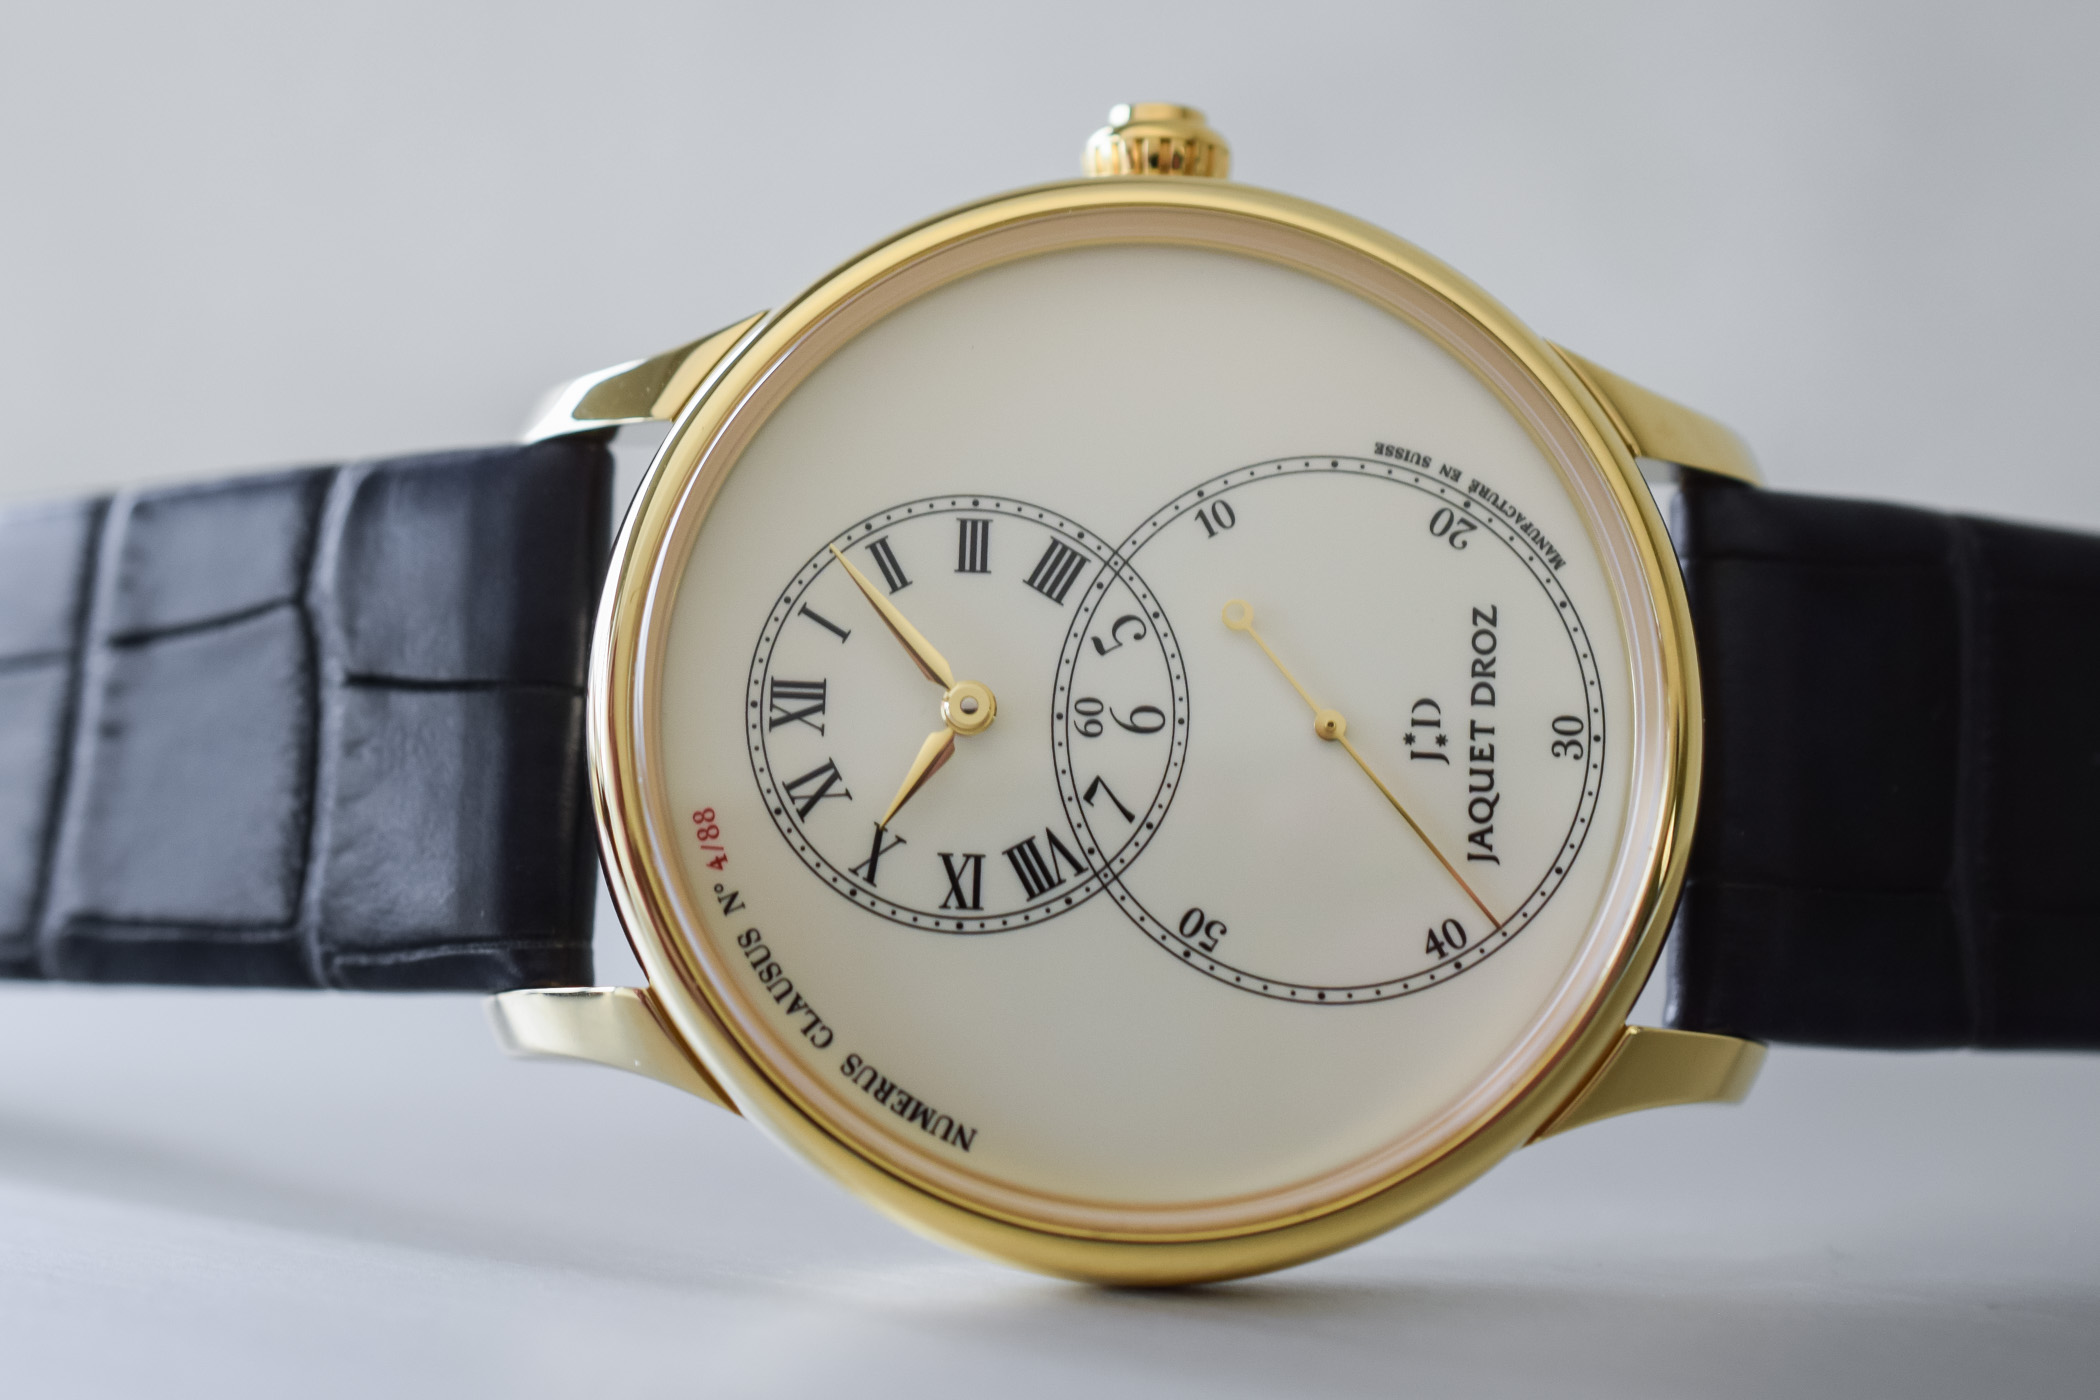 Jaquet Droz Grande Second Tribute Yellow Gold - Baselworld 2018